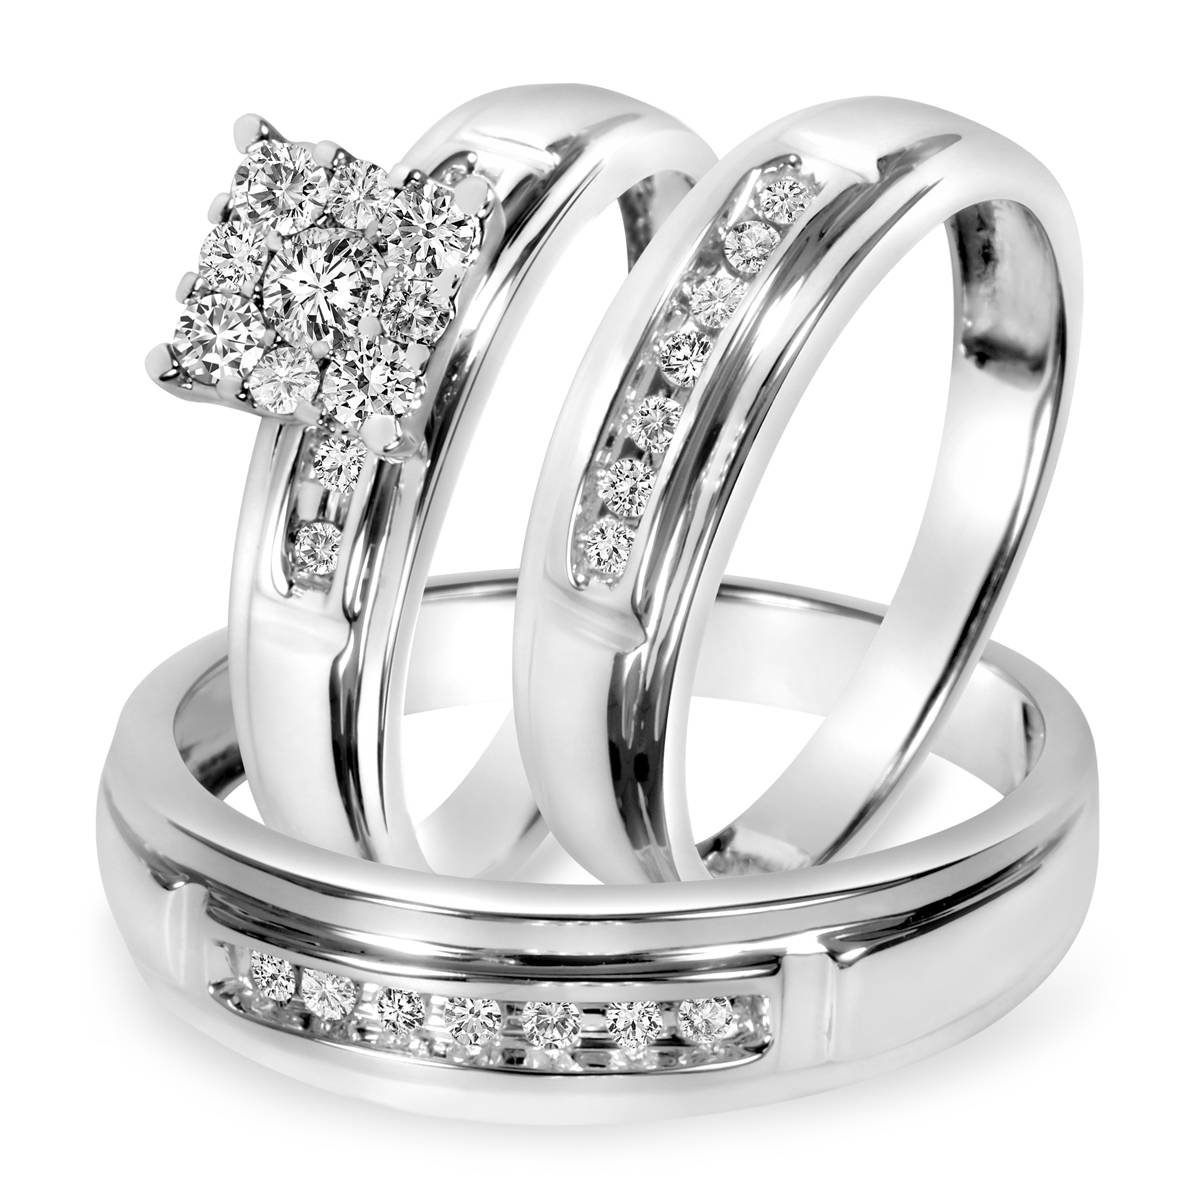 15 Photos Cheap Wedding Bands Sets His and Hers